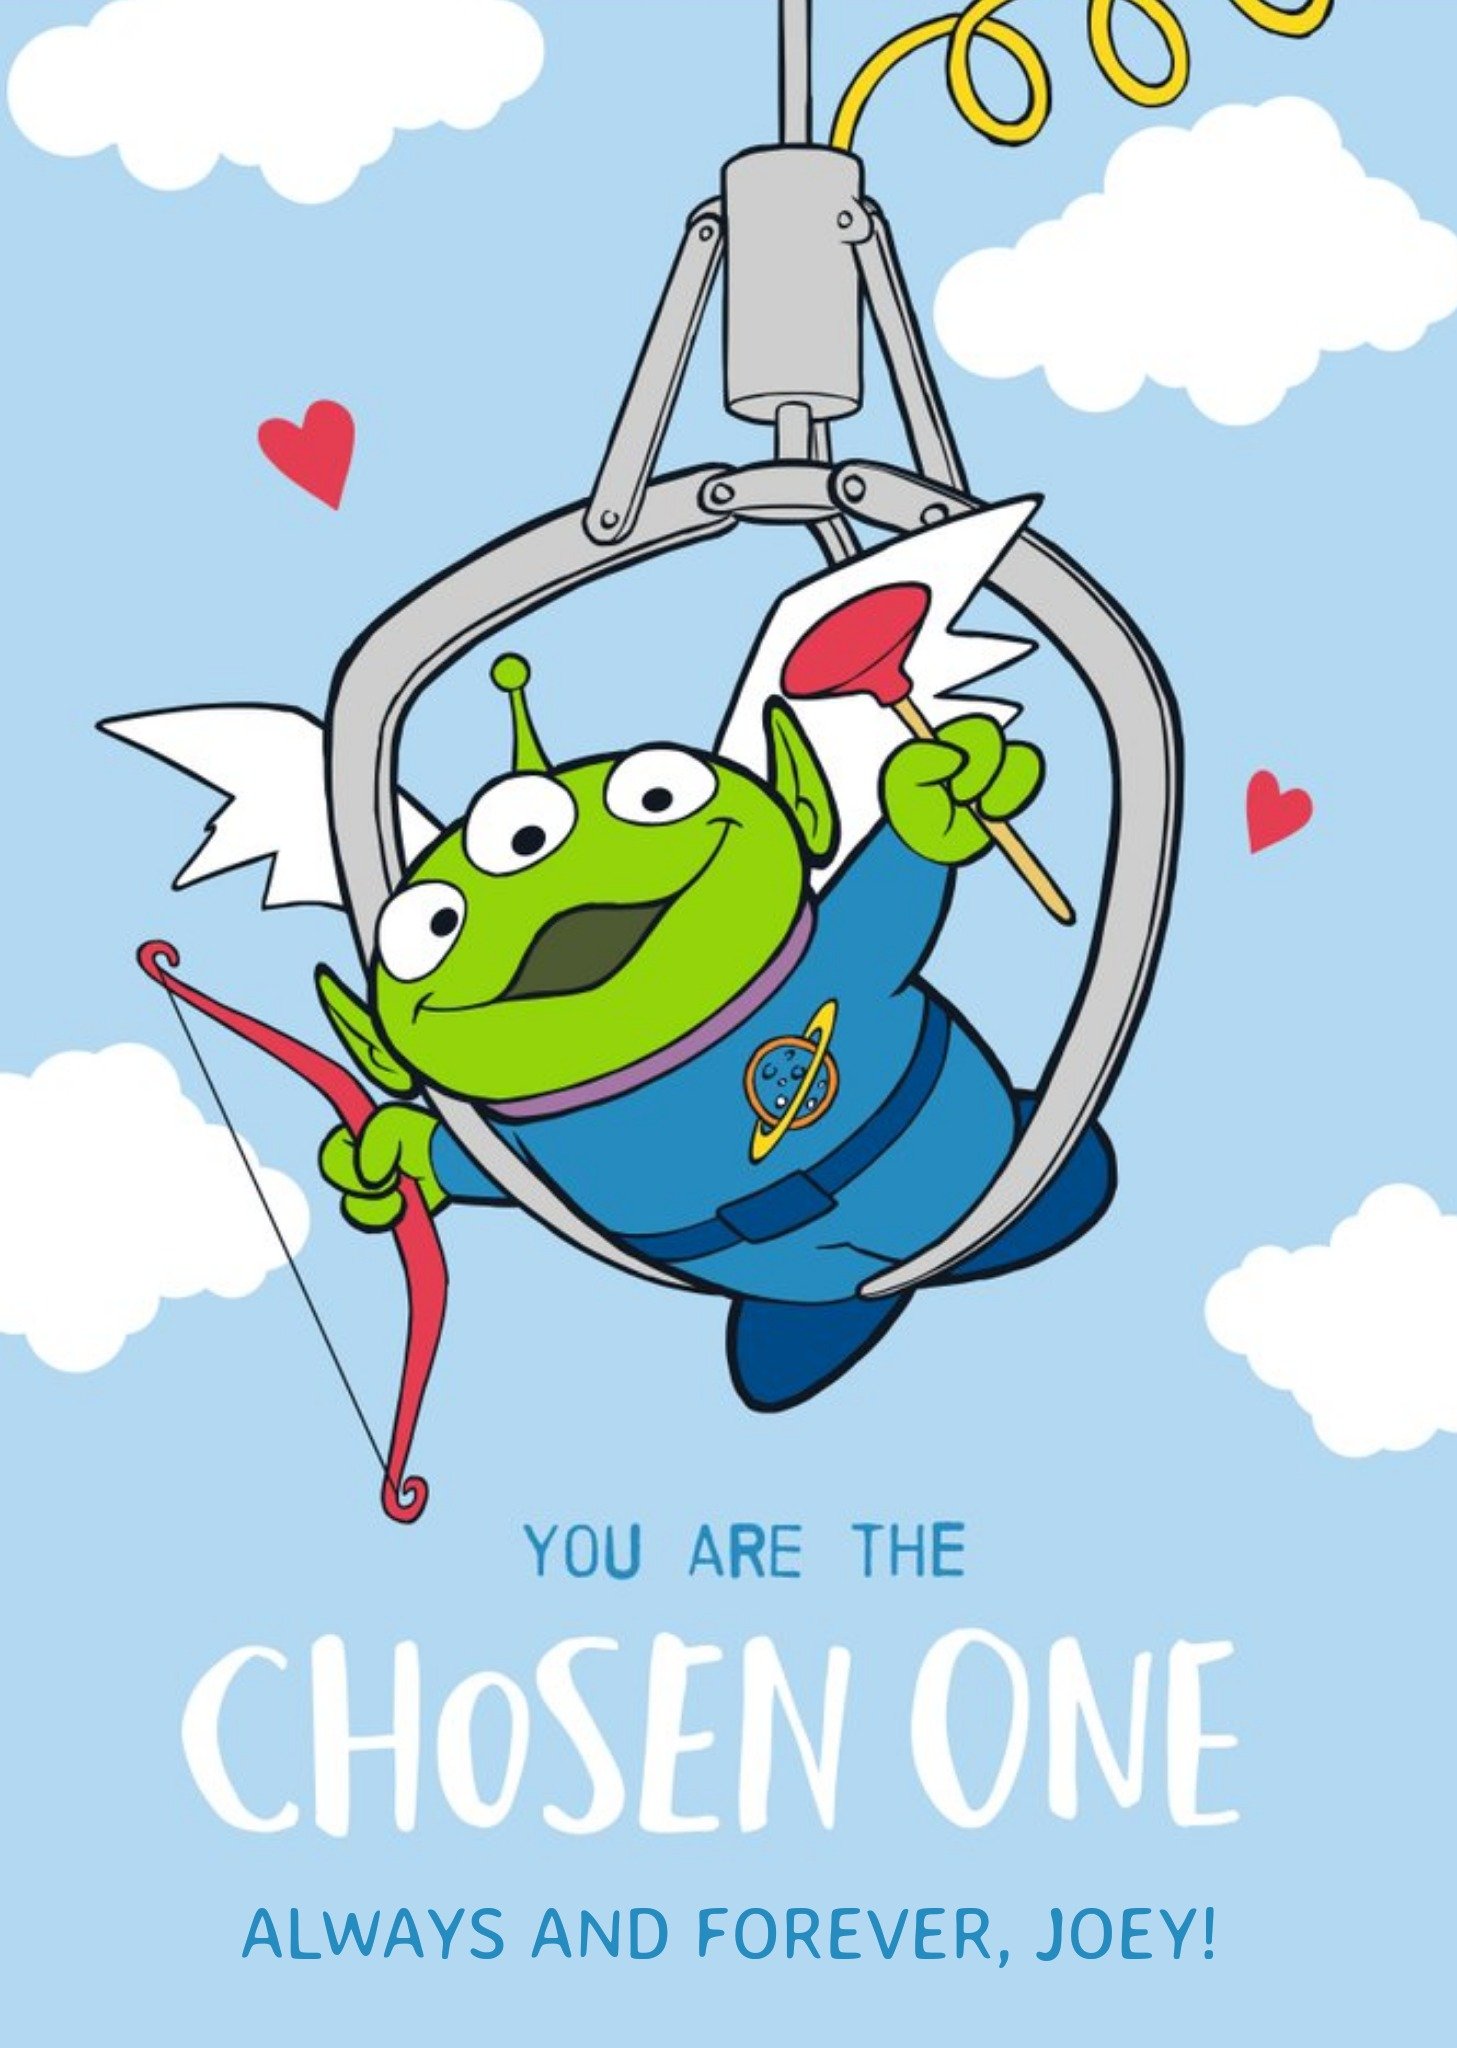 Disney Toy Story Alien Character You Are The Chosen One Anniversary Card, Large